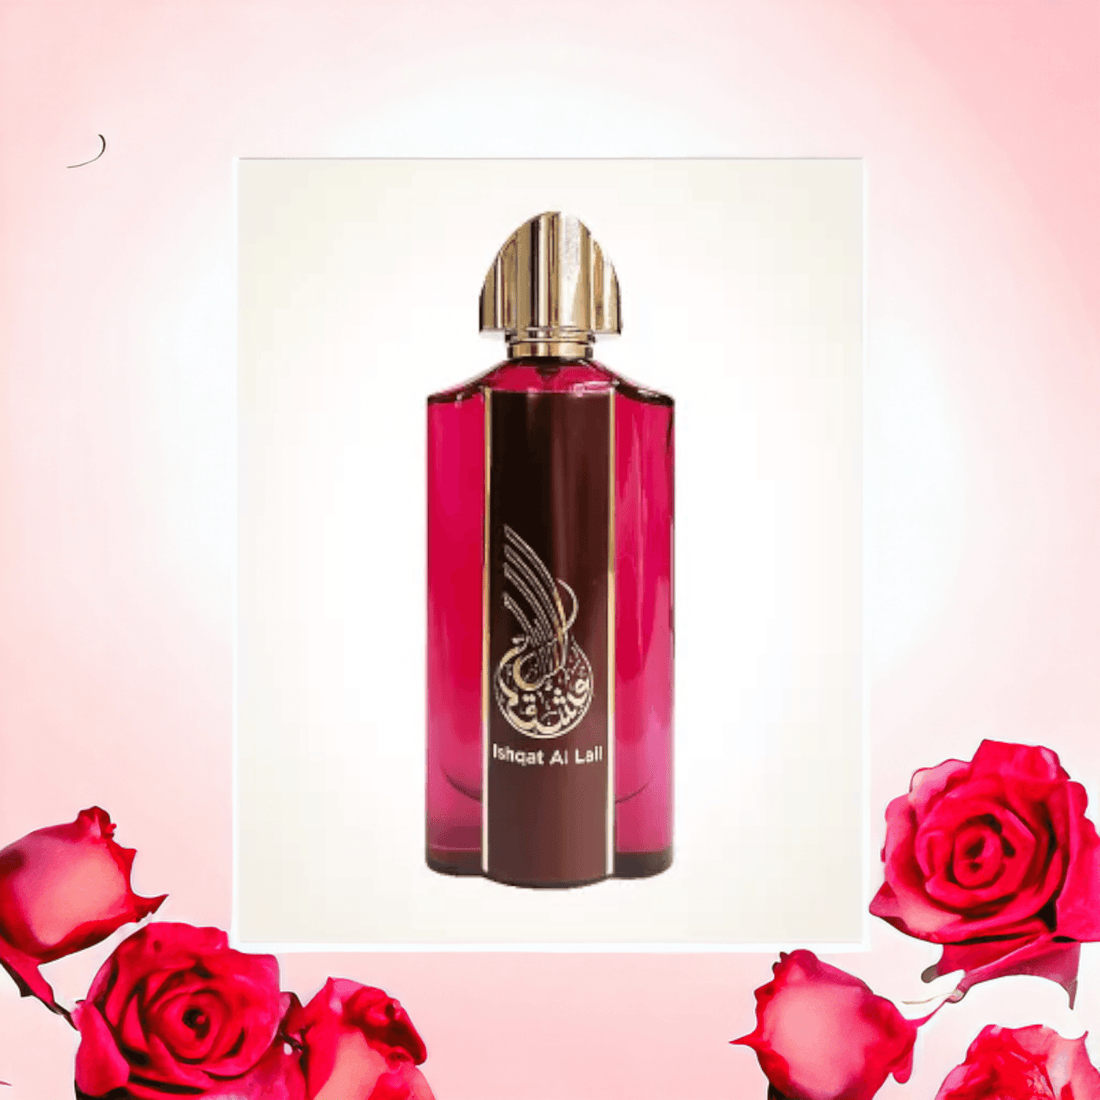 Luxurious bottle of Fragrance World Athoor Al Alam Ishqat Al Lail, showcasing its unique blend of poppy and almond.